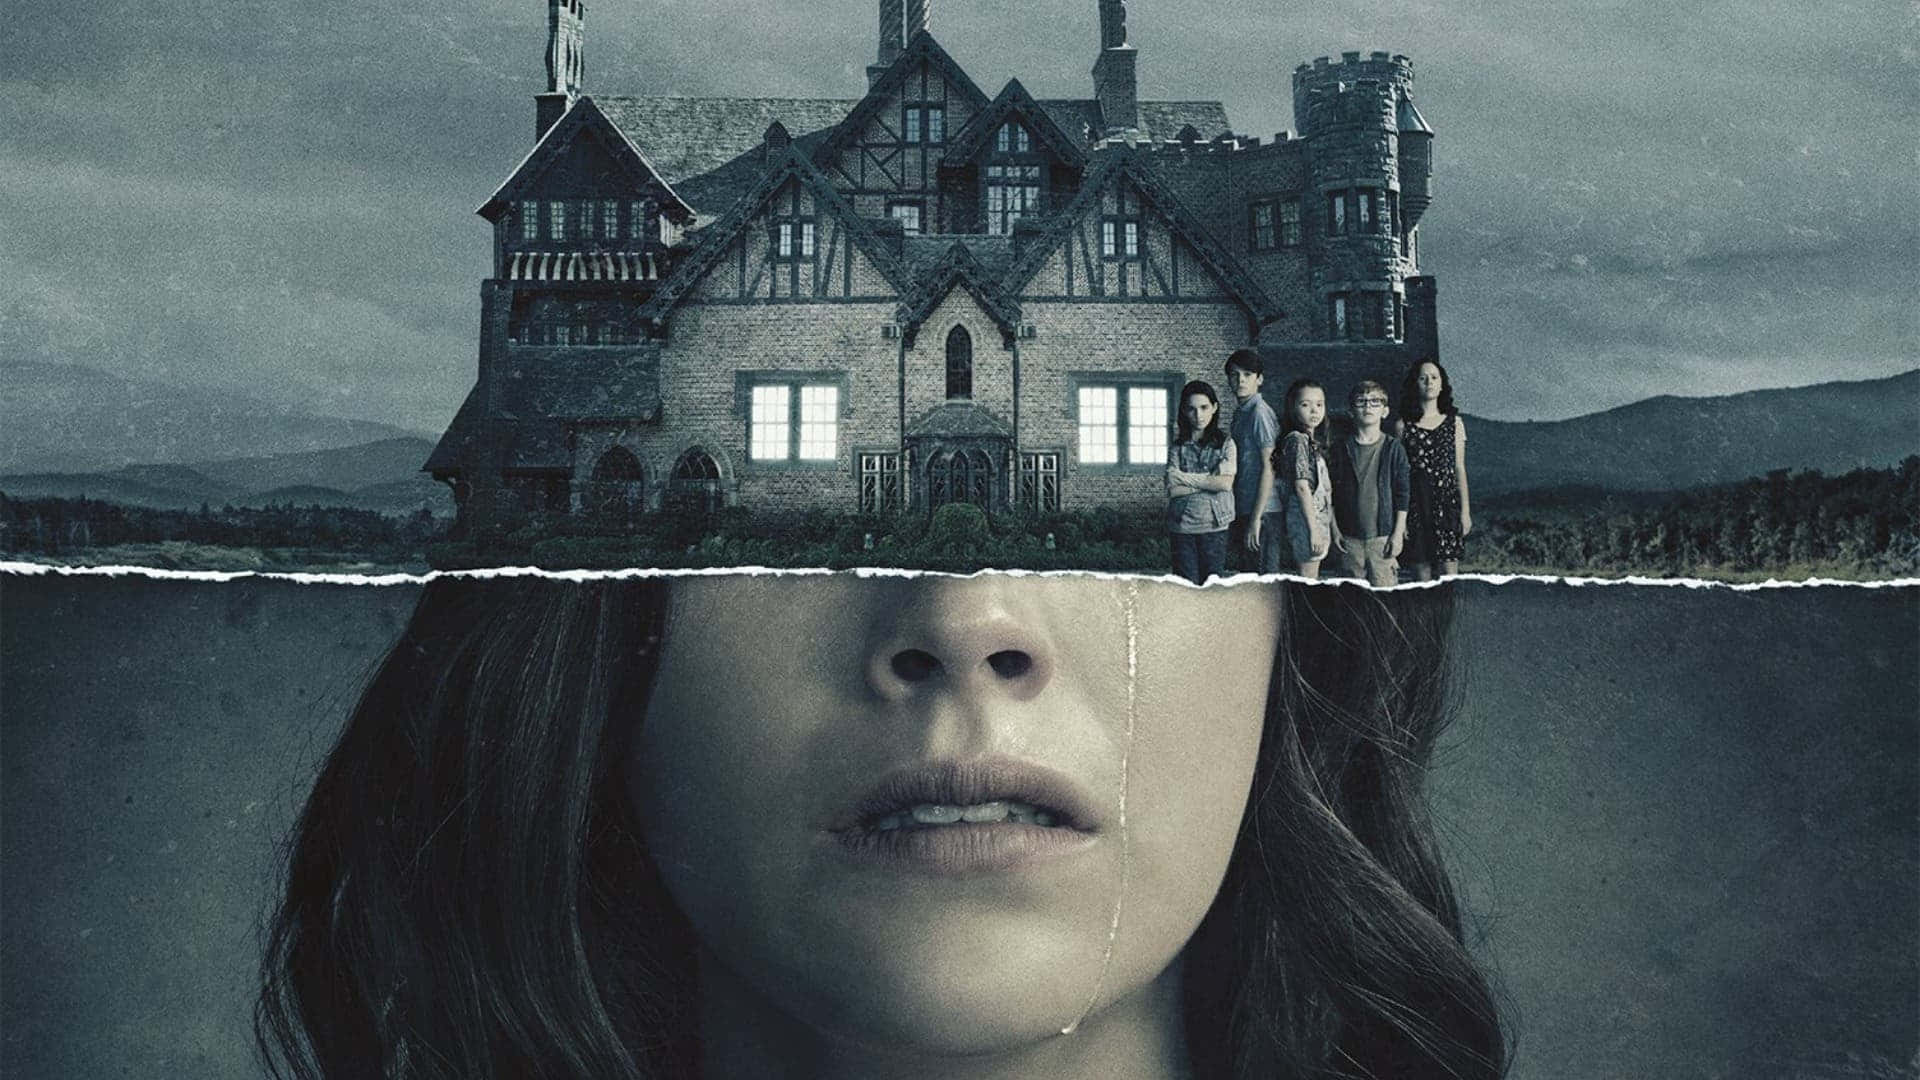 Eerie And Chilling Portrait Of The Bly Manor Amidst The Fog Background